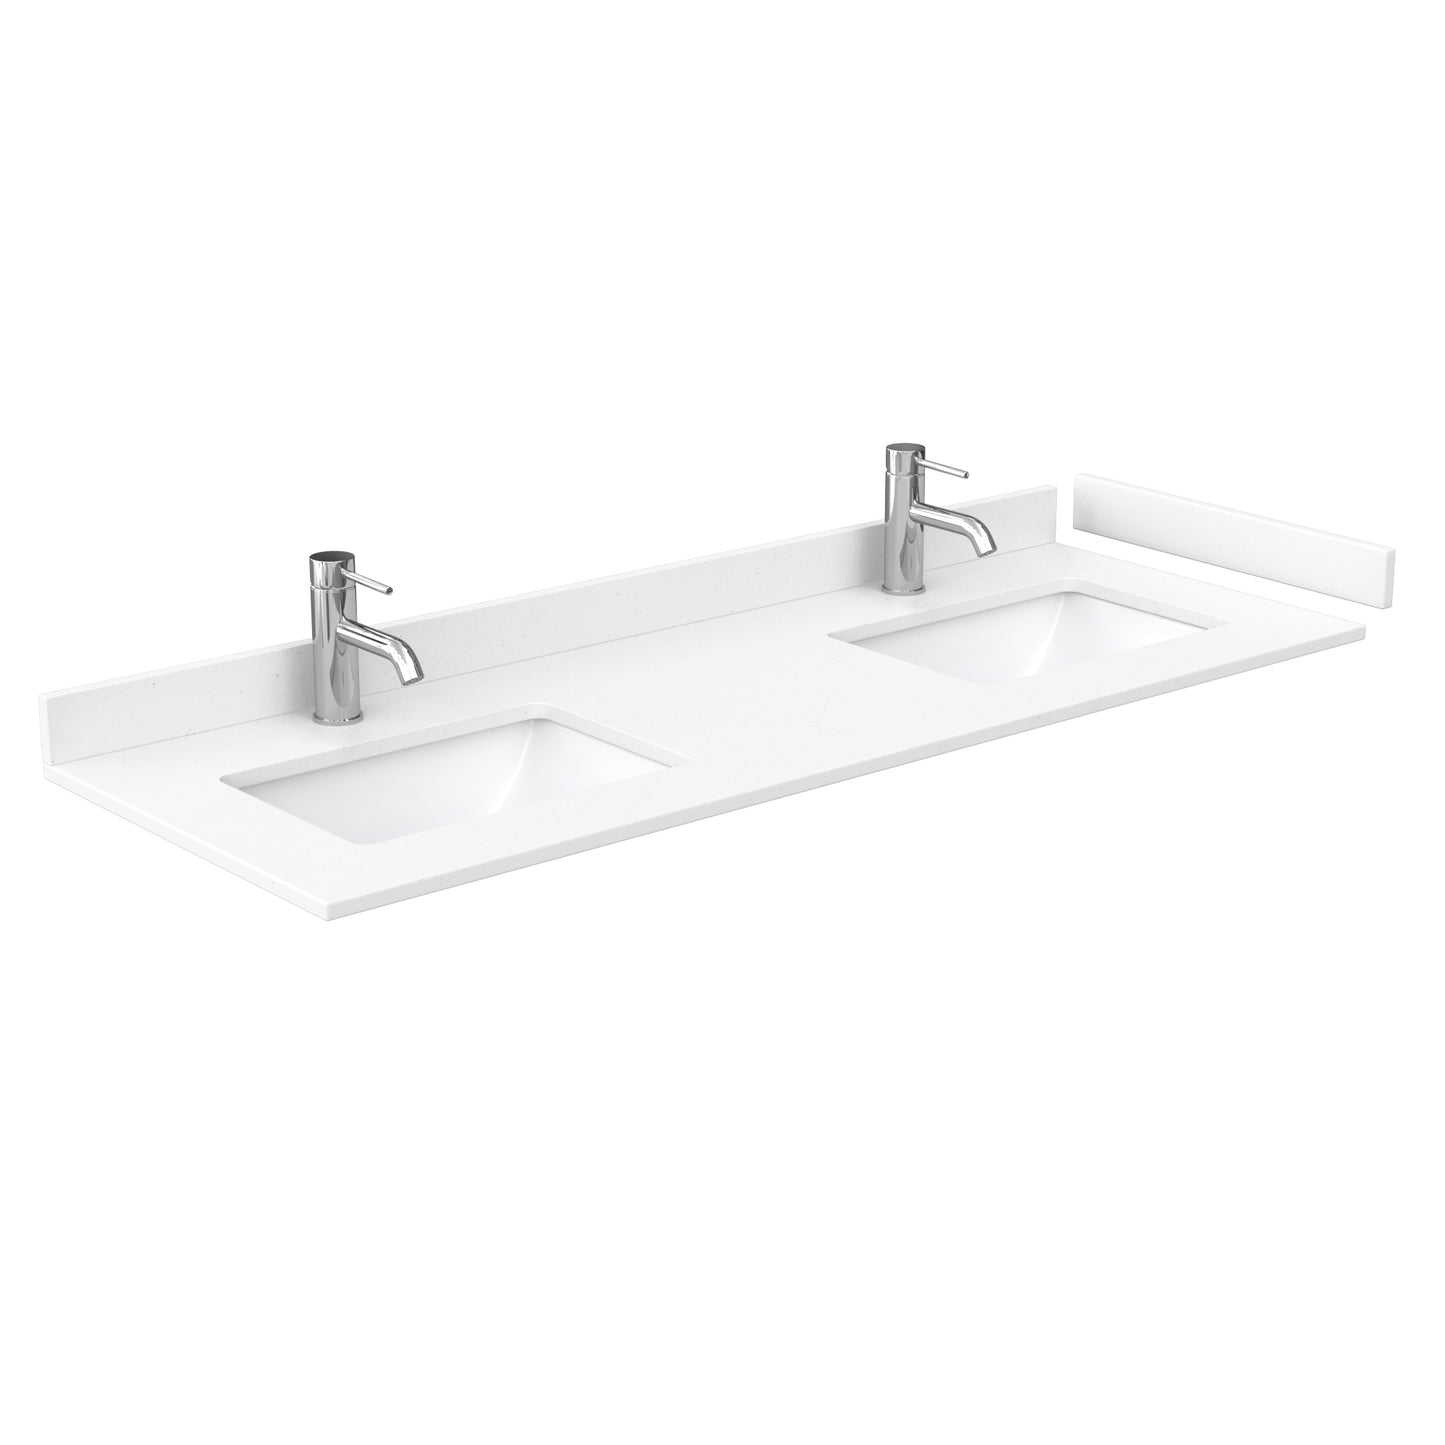 Wyndham Avery 60 Inch Double Bathroom Vanity White Cultured Marble Countertop with Undermount Square Sinks in Matte Black Trim - Luxe Bathroom Vanities